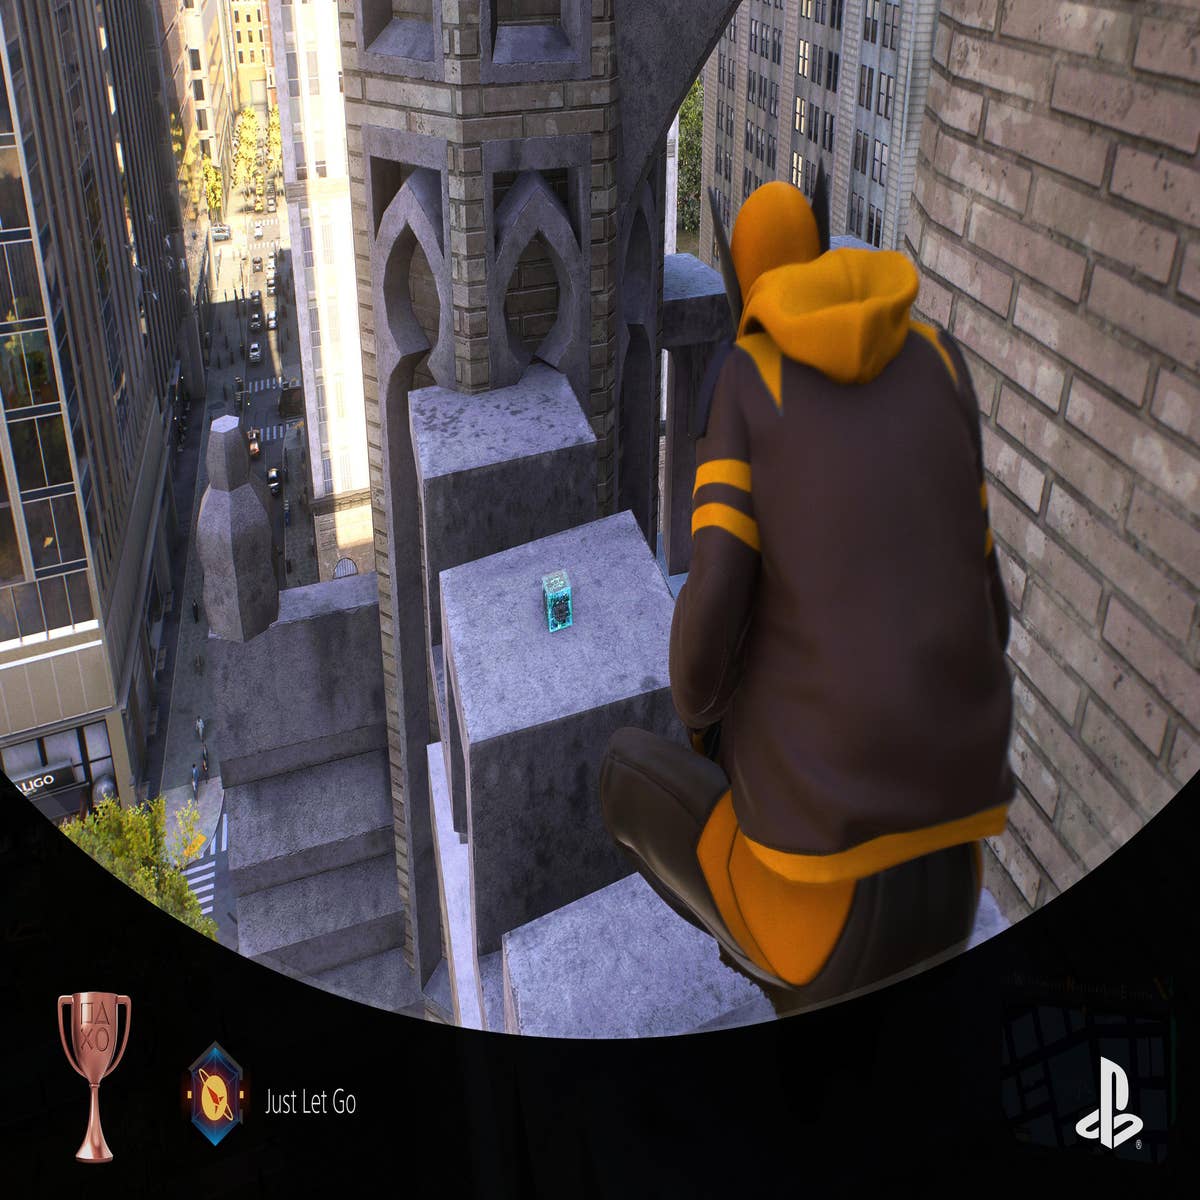 Spider-Man 2 Just Let Go trophy guide: How to find the science trophy